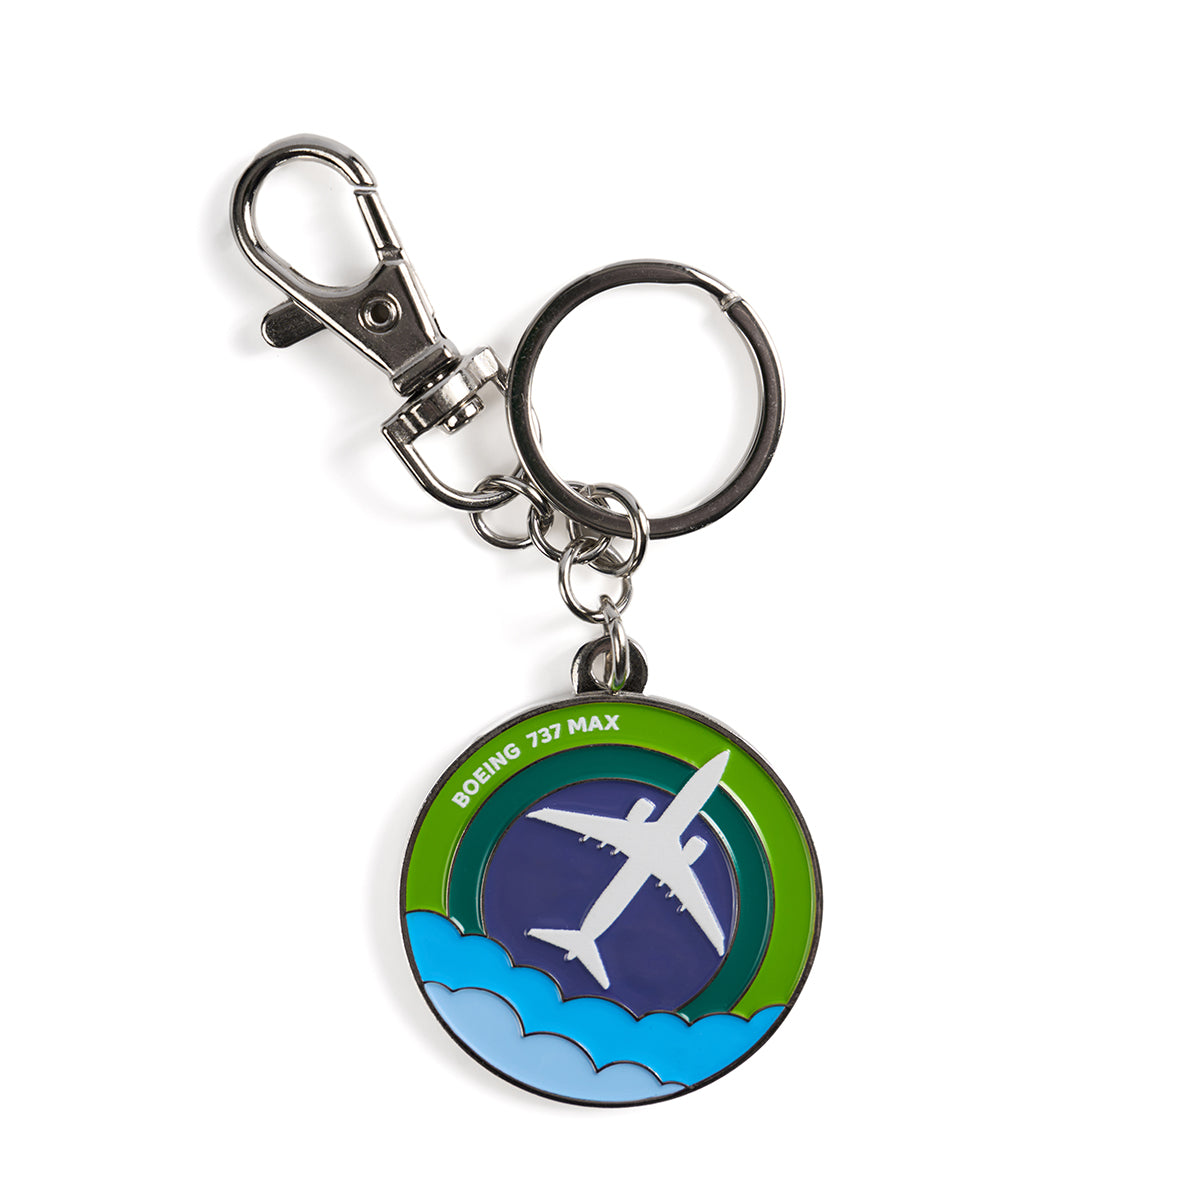 Skyward keychain, featuring the iconic Boeing 737 MAX in a roundel design.